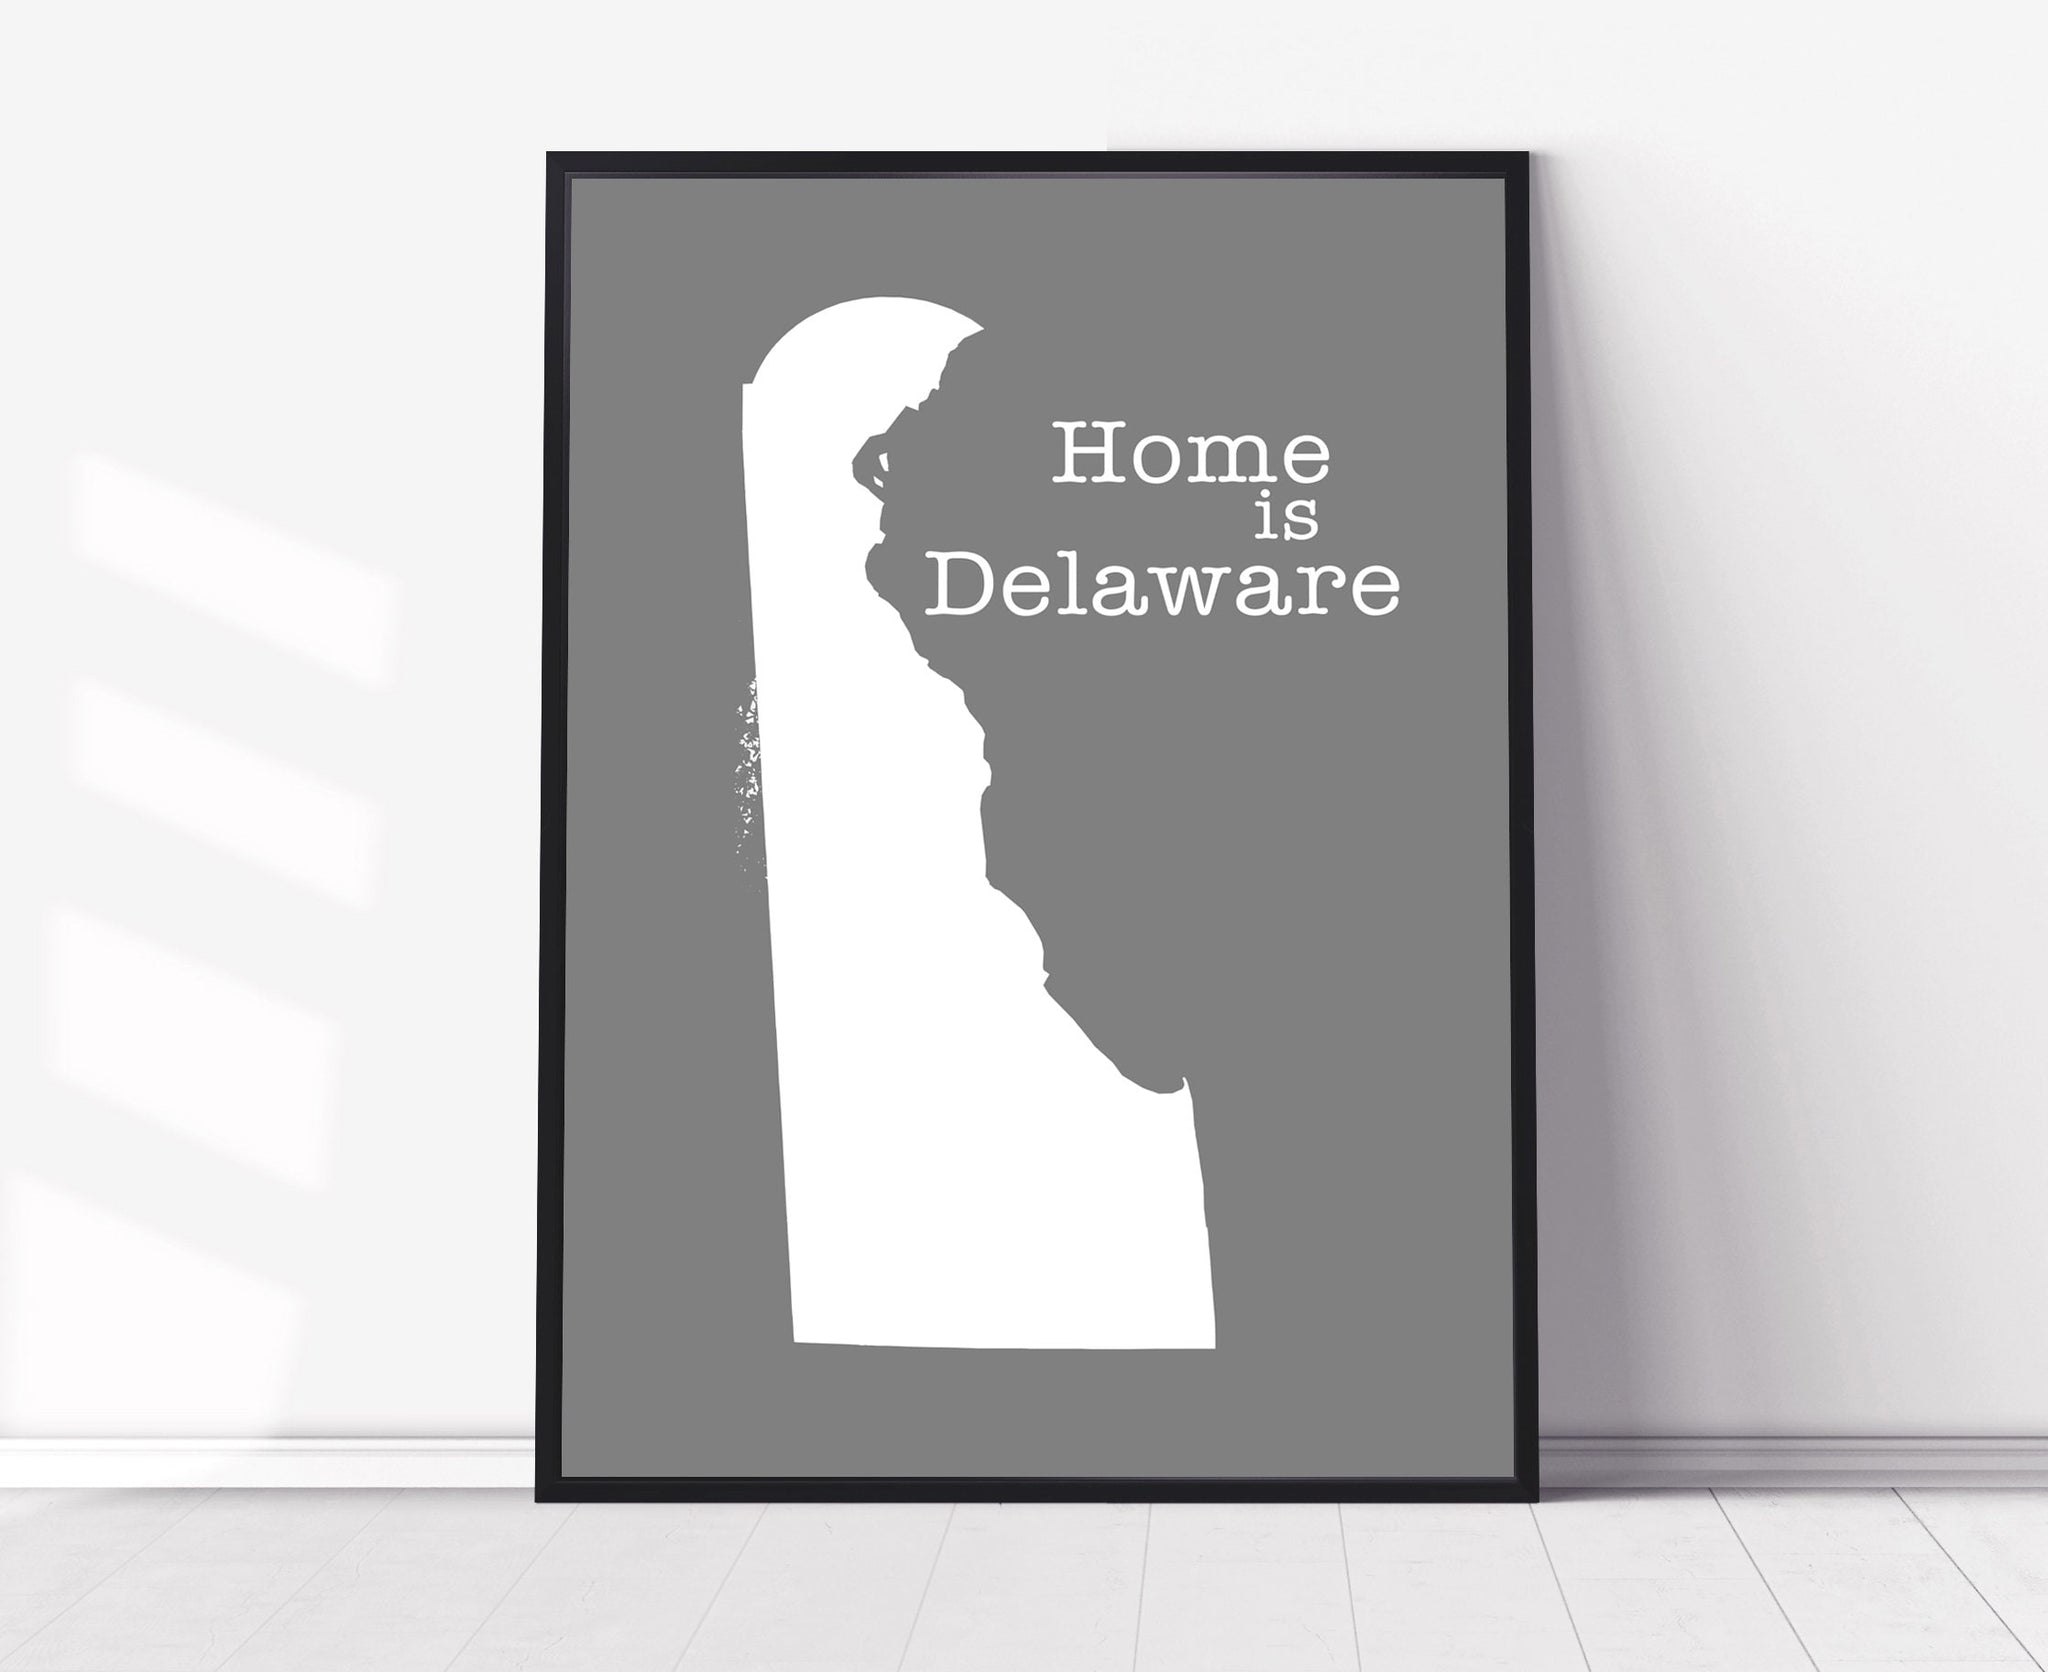 Delaware Map Wall Art, Delaware City Map, Poster Print, State Posters, Home wall decor, Office wall decor, Home gifts, Kids room wall art